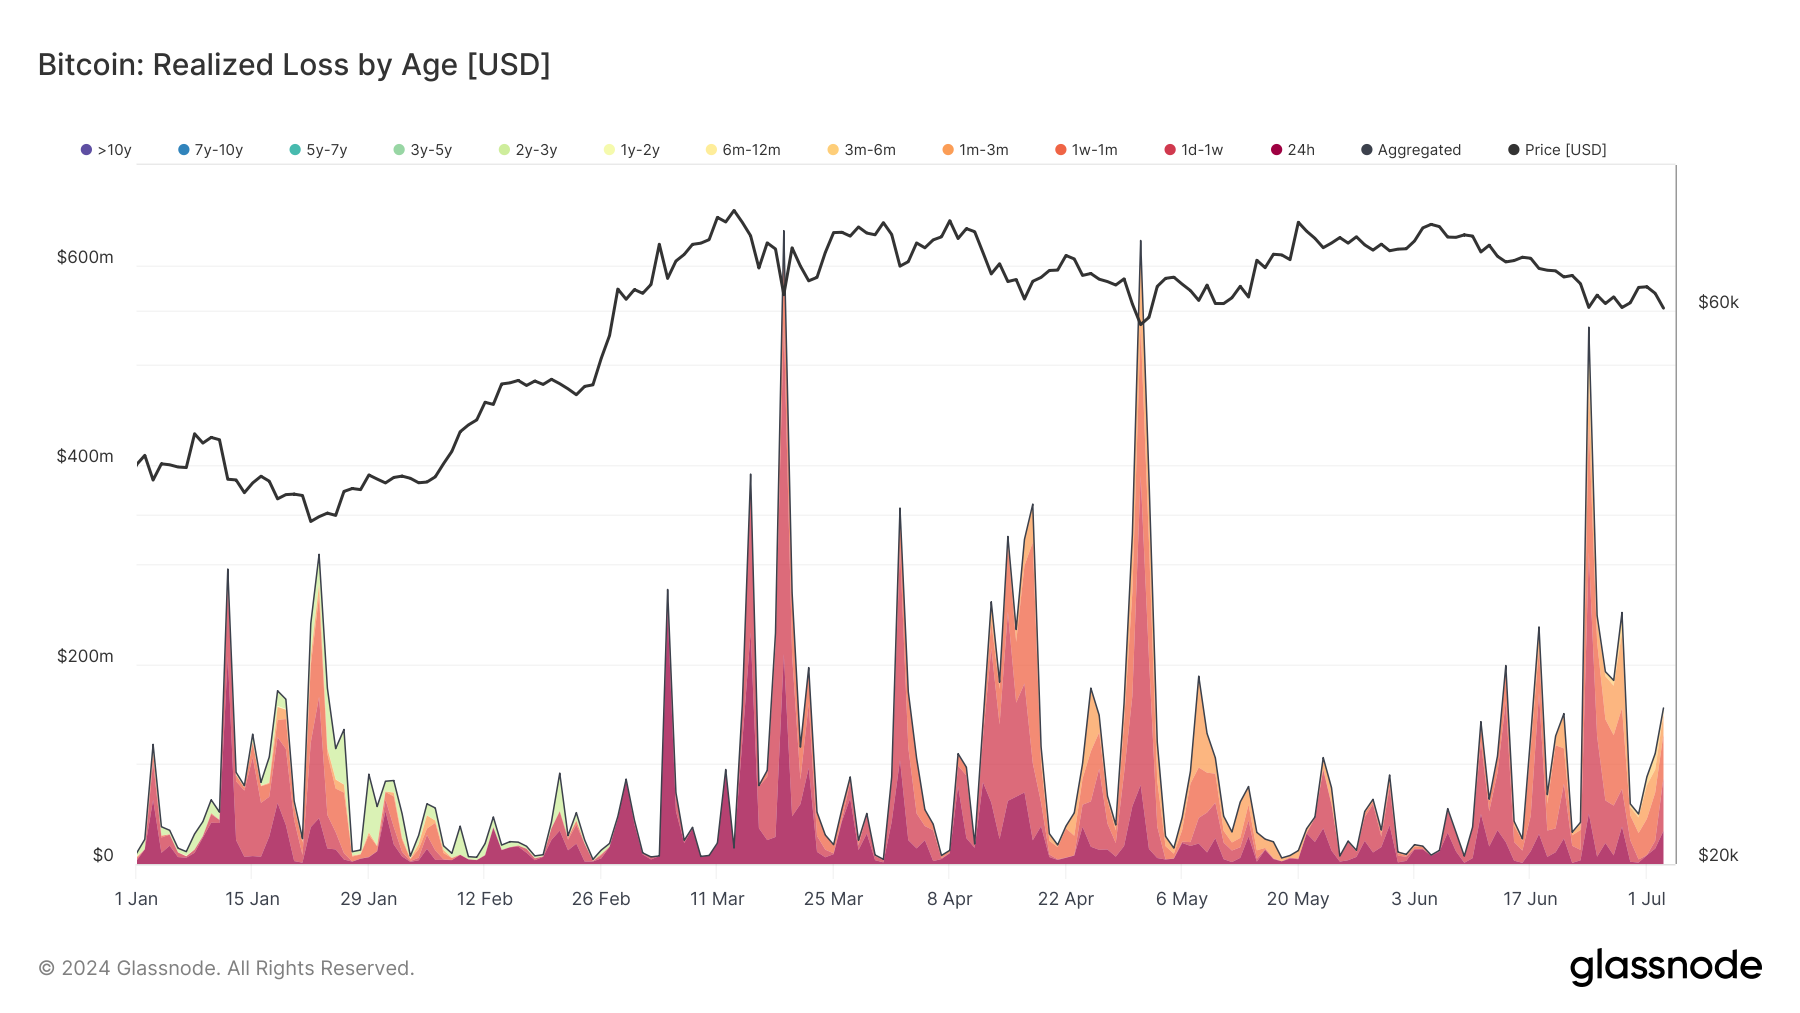 Short-term holders greater threat to Bitcoin stability than Mt. Gox payouts